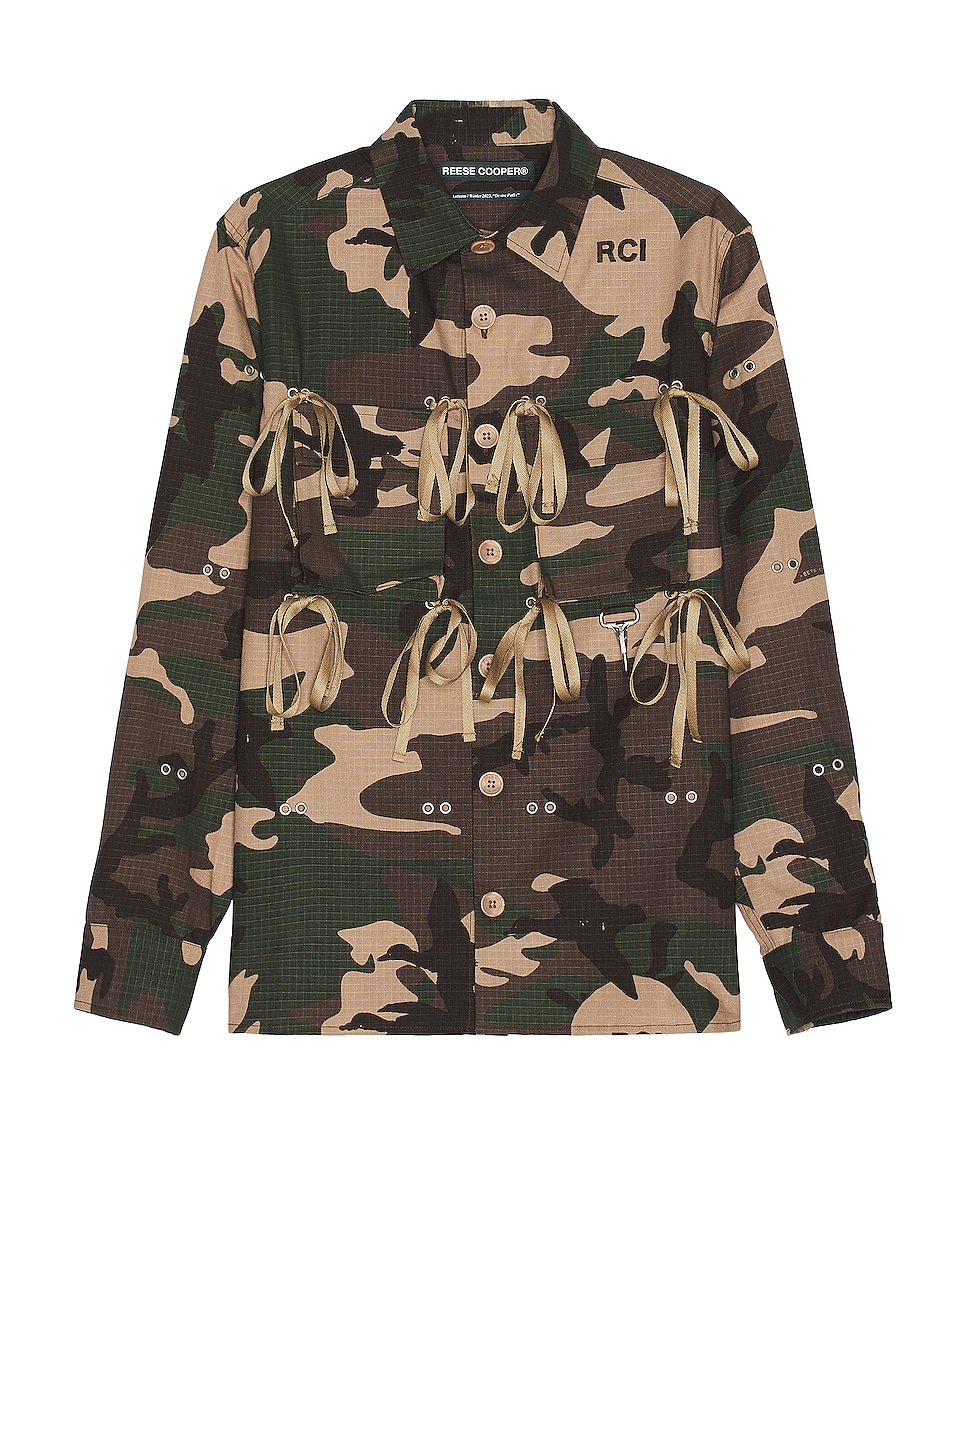 Image 1 of Reese Cooper Modular Pocket Button Down Shirt in Camo